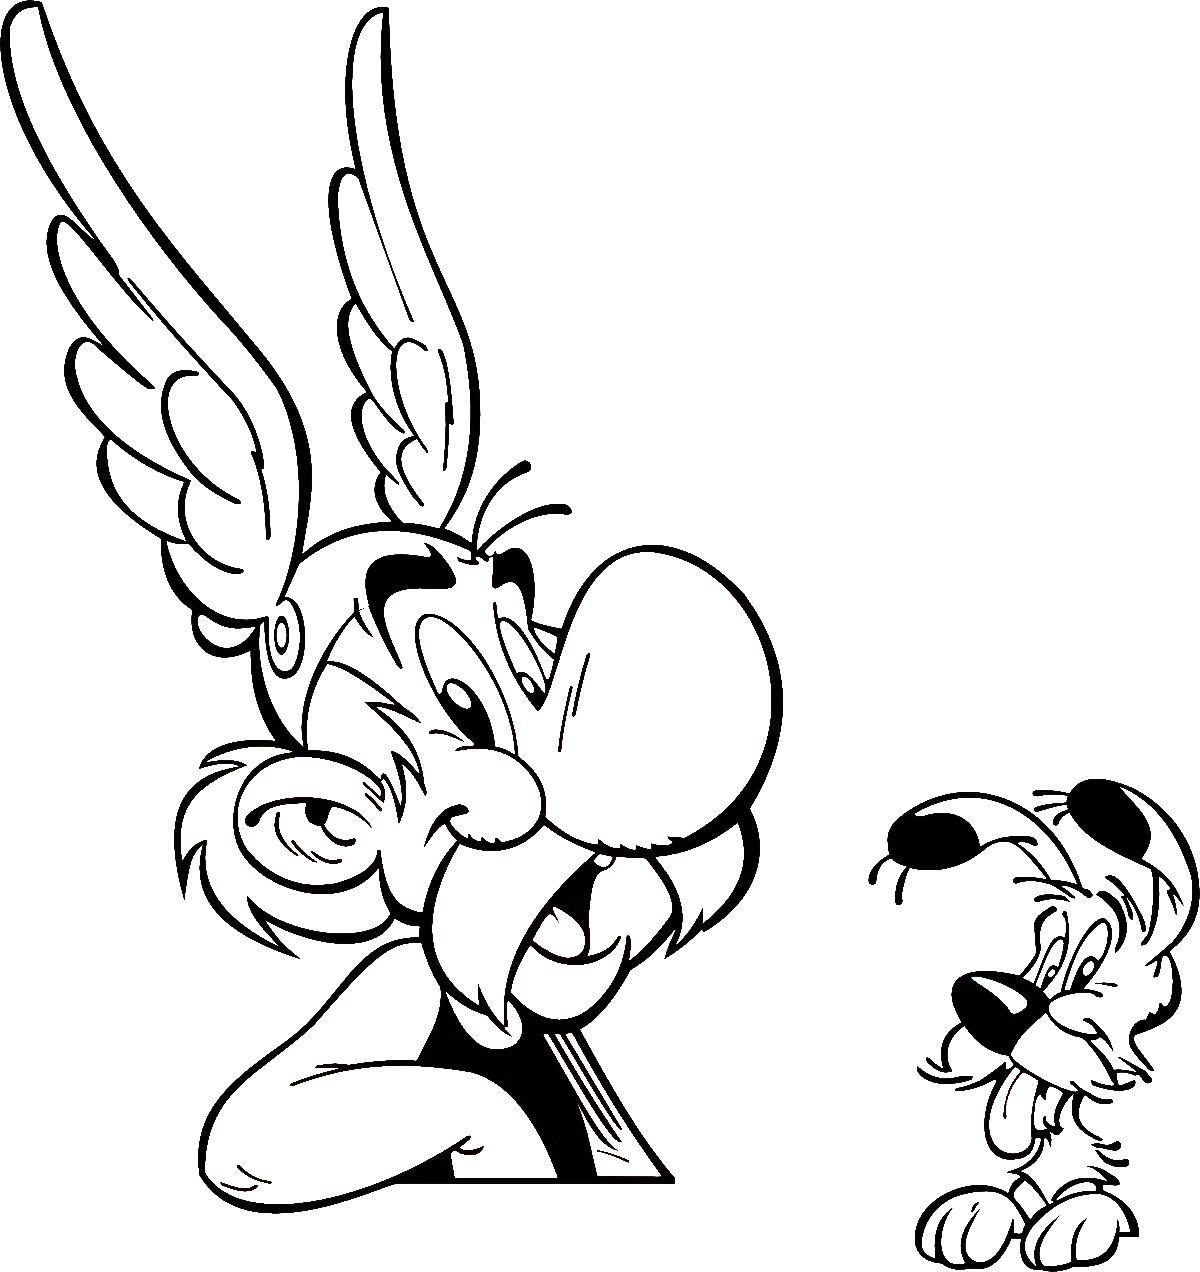 Free Asterix coloring page to print and color